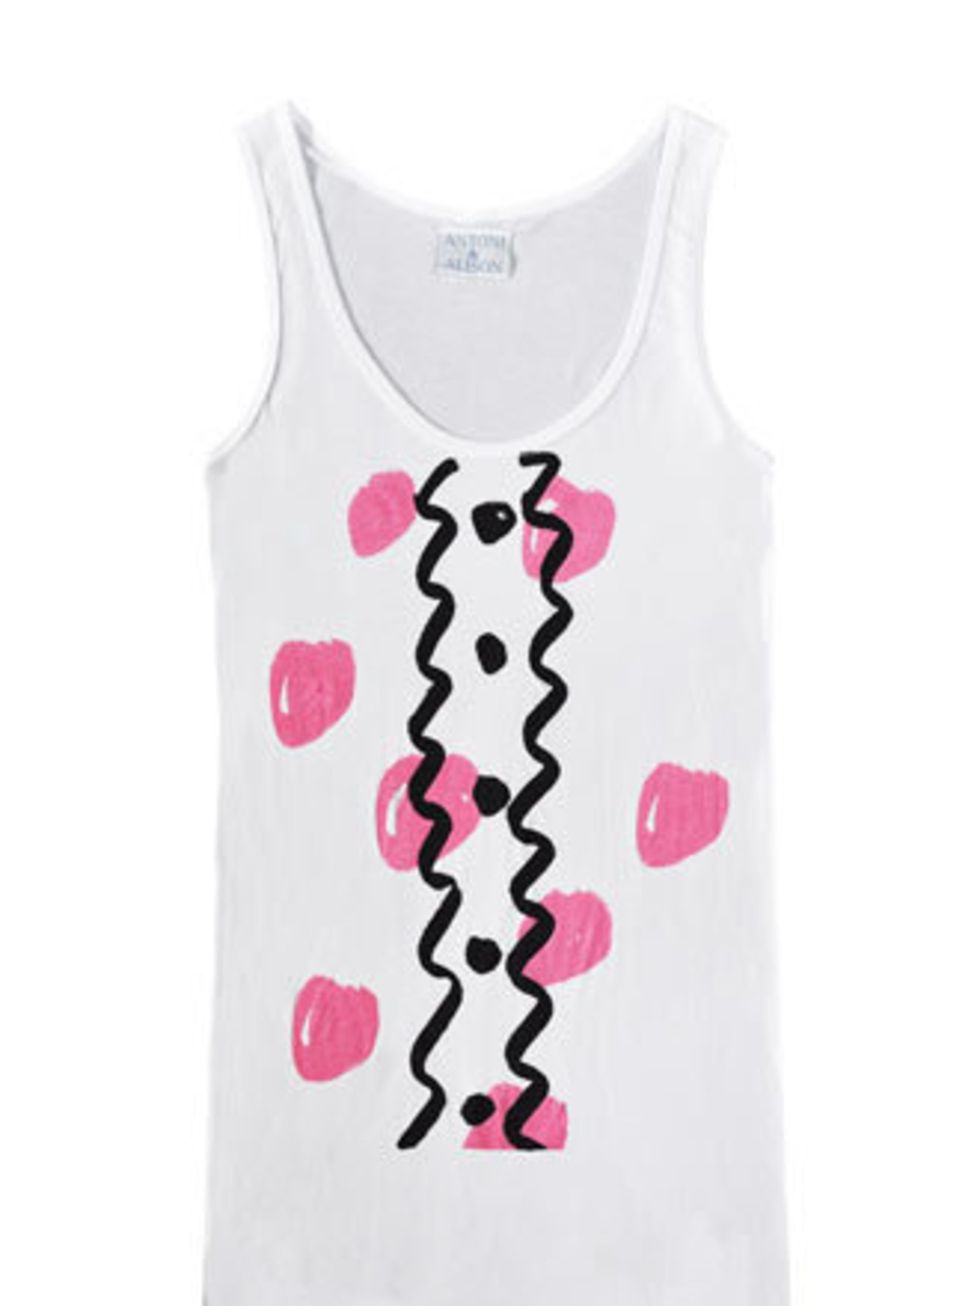 <p>Regulars at London Fashion Week, we applaud Antoni &amp; Alison for their fun designs. This vest made the ELLE team swoon, definitely more than just a wardrobe basic.</p><p>Tank top, £88 by Antoni &amp; Alison</p>